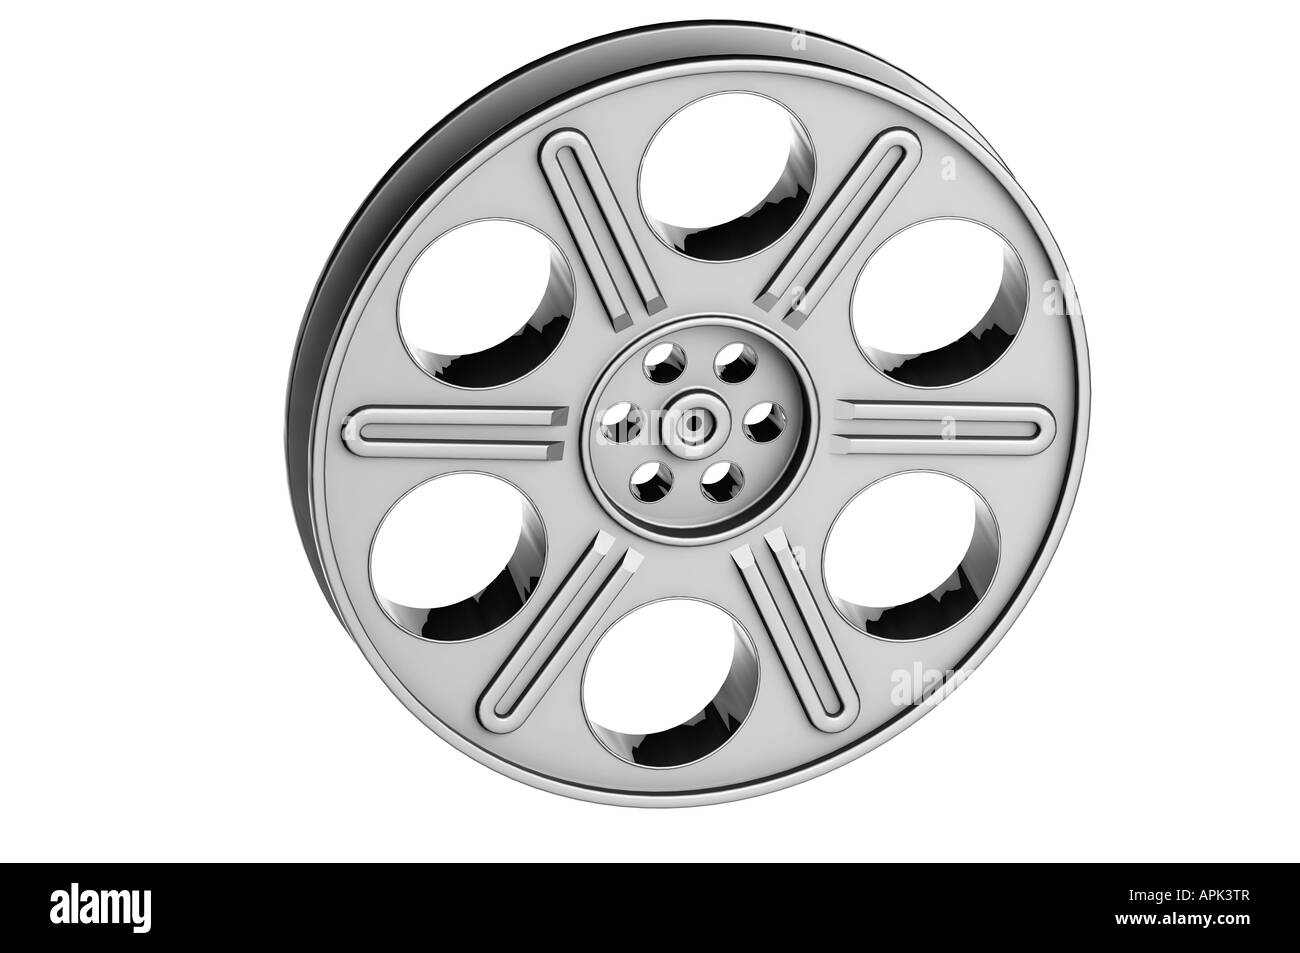 Film reel cutout Black and White Stock Photos & Images - Alamy